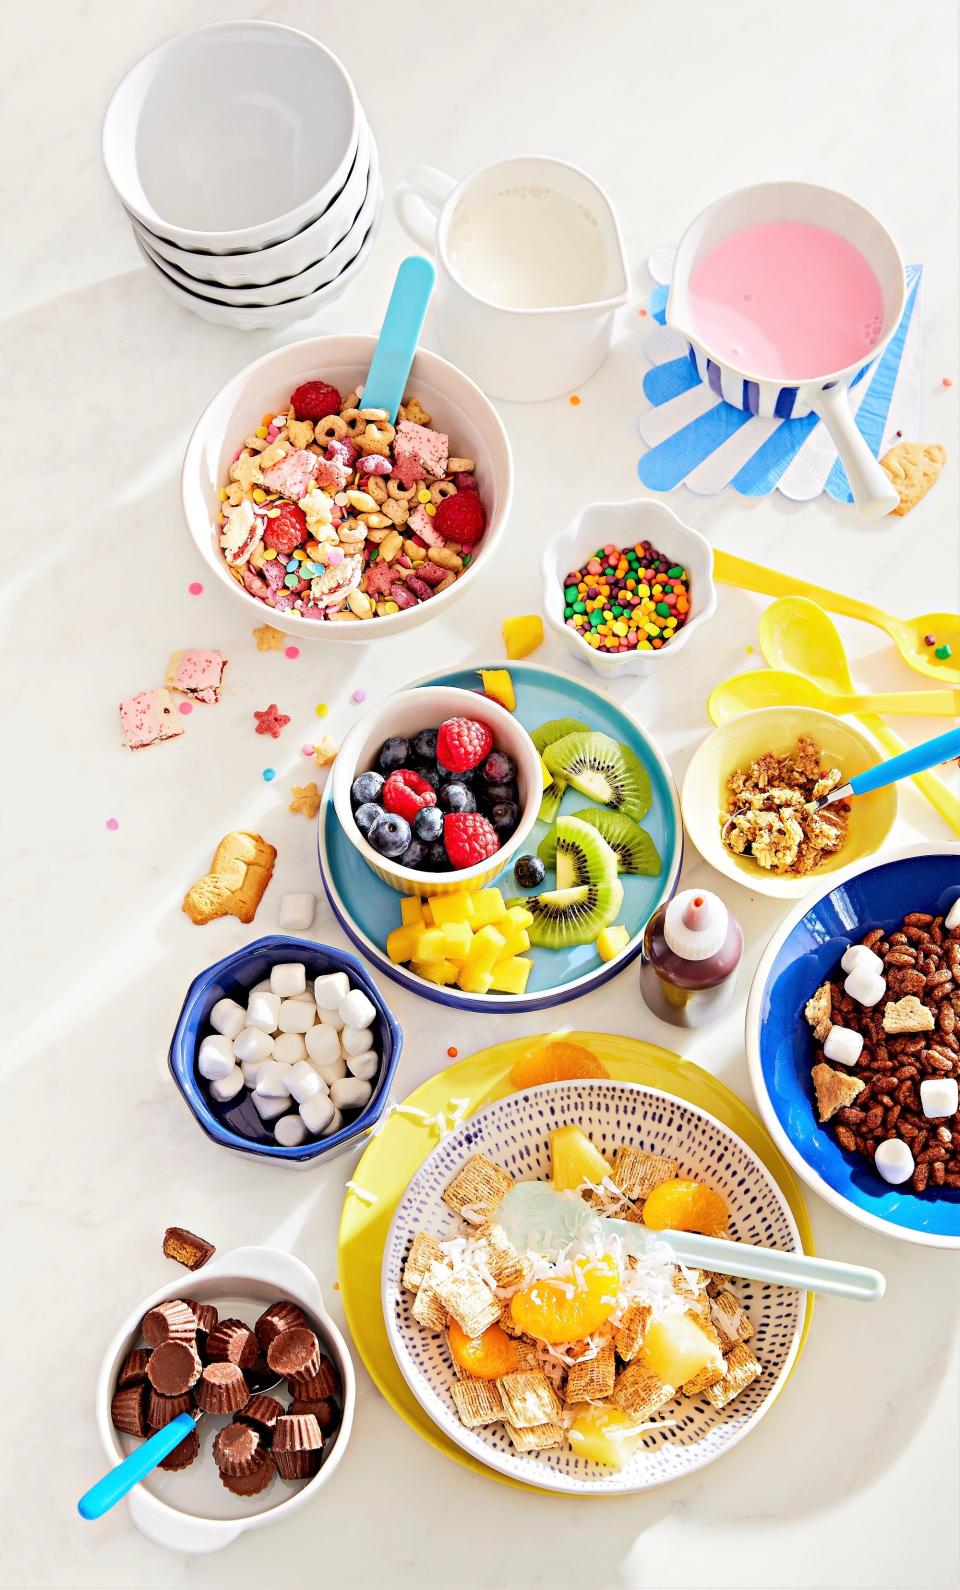 Think outside the cereal bowl! These yummy recipes transform your kids’ favorite cereals into family-favorite sweet treats.